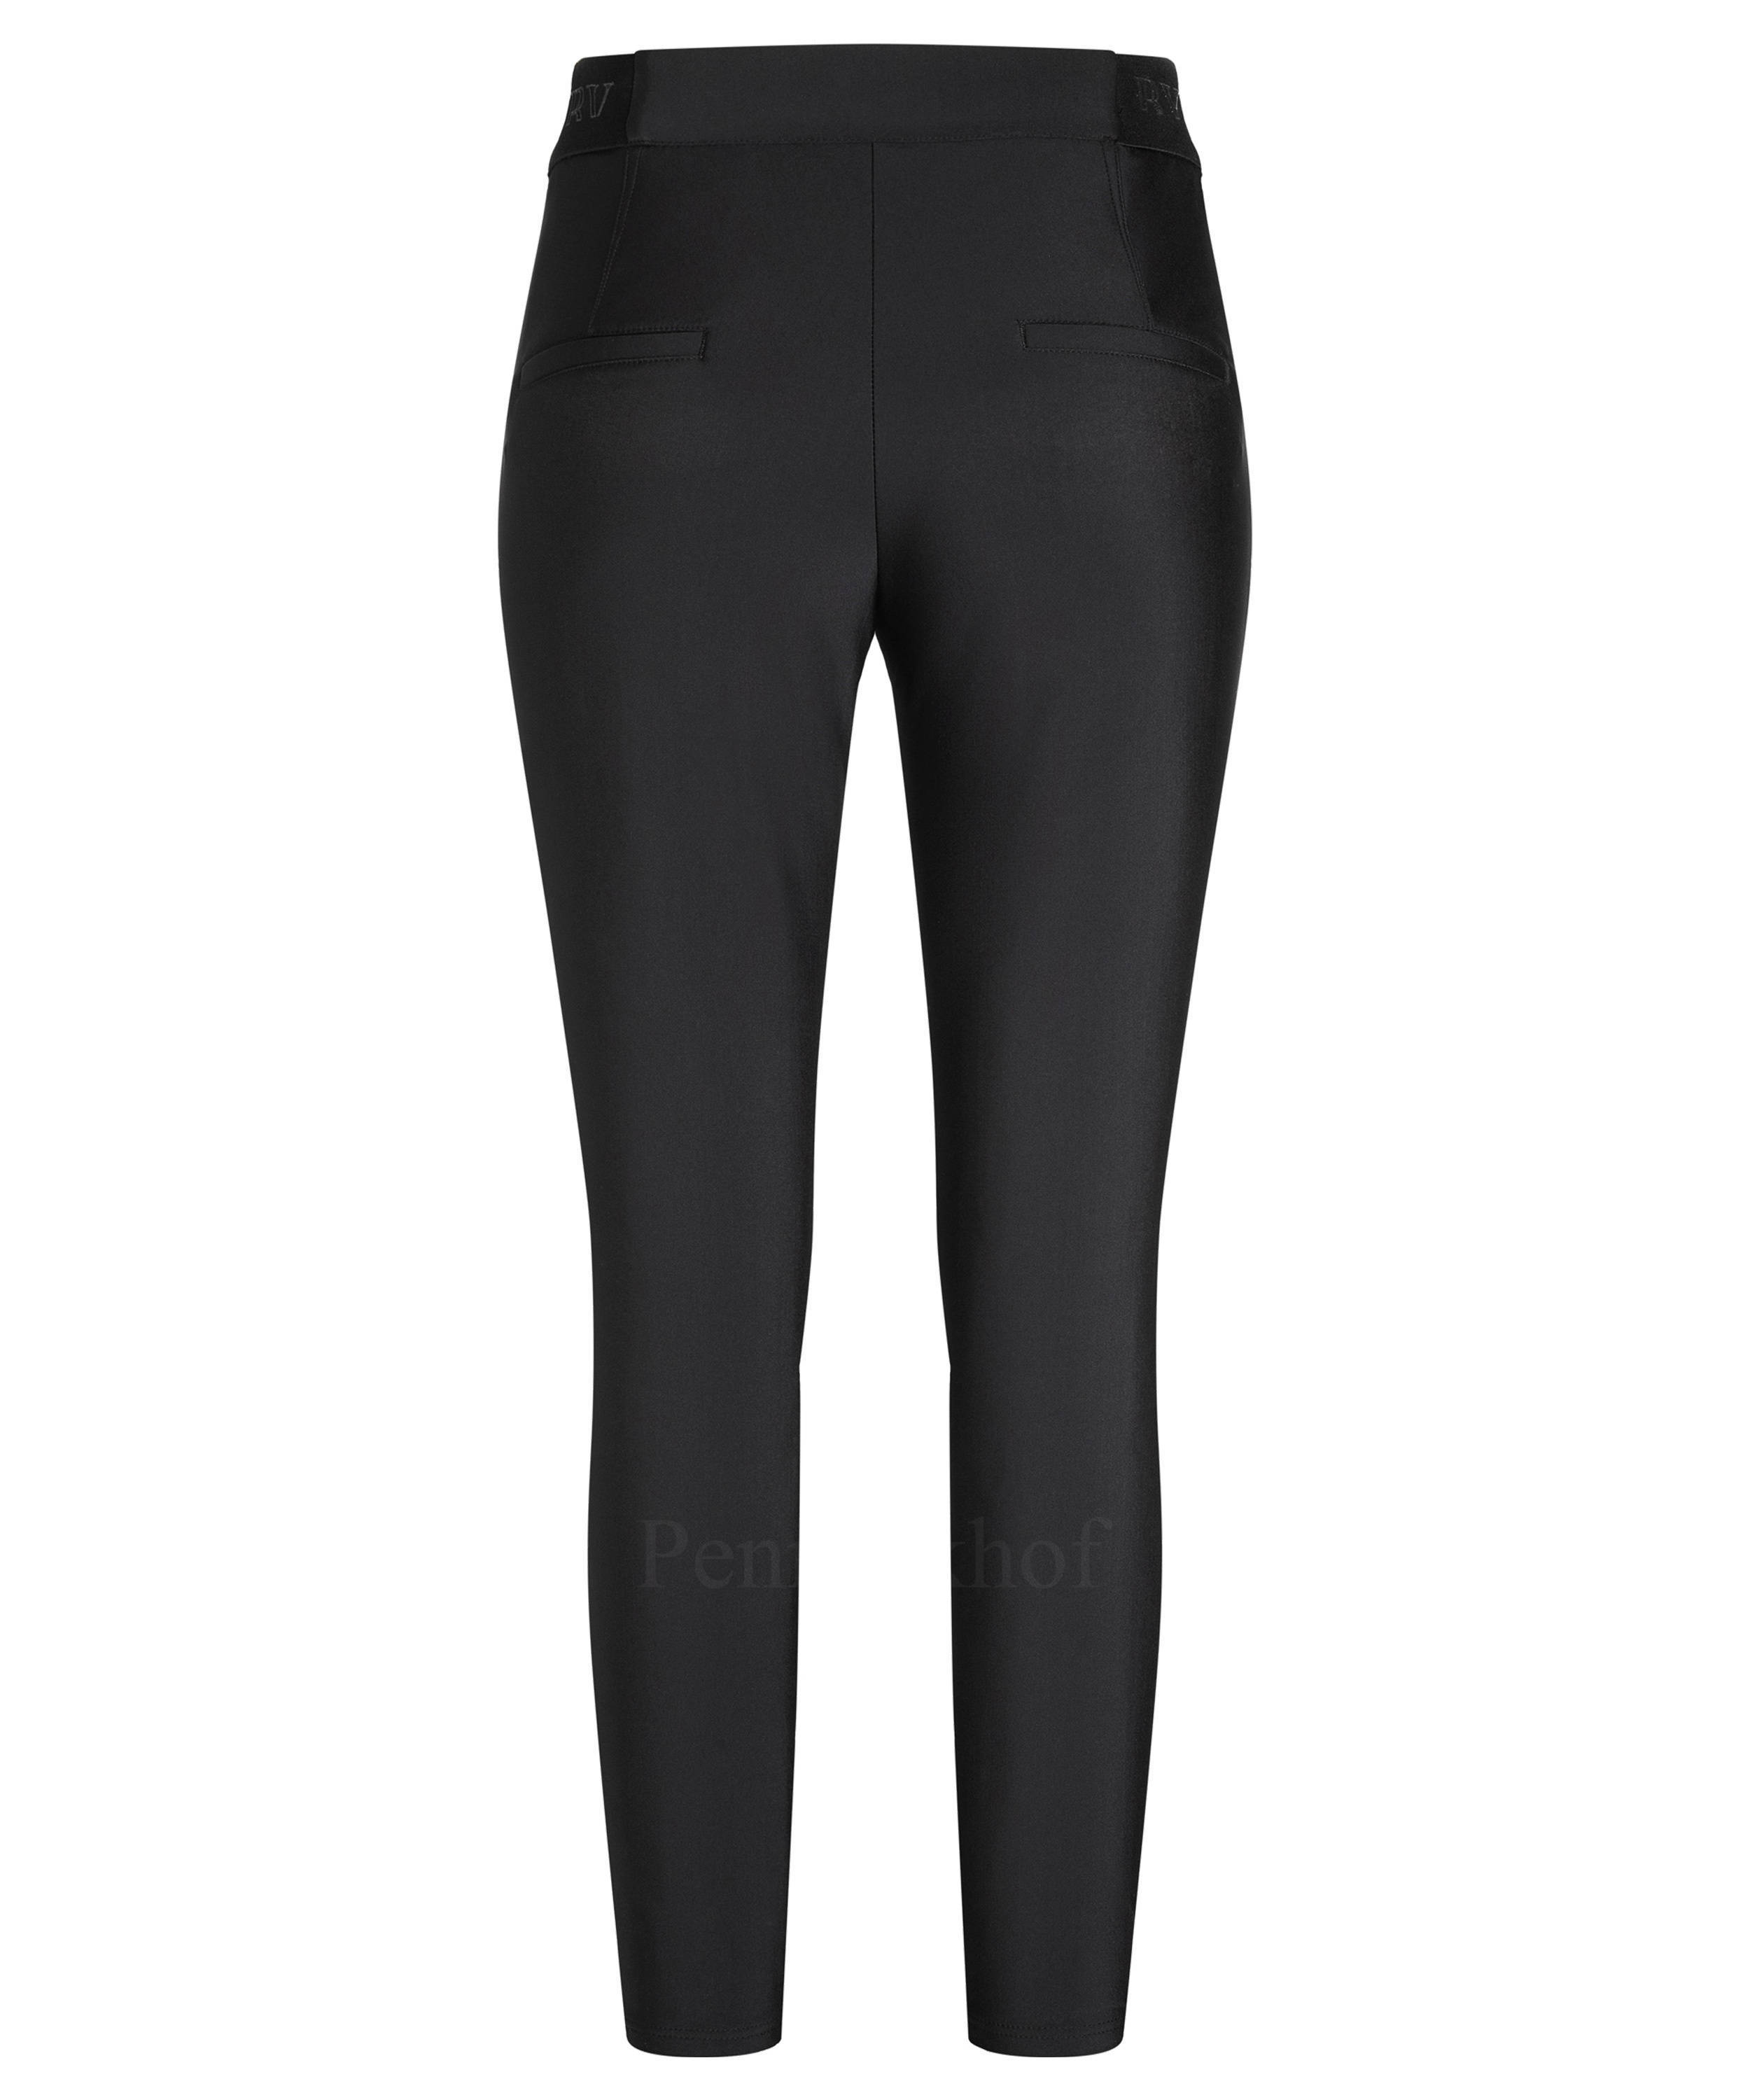 Cambio trousers RAVE 6801 0234-01 Black by Penninkhoffashion.com